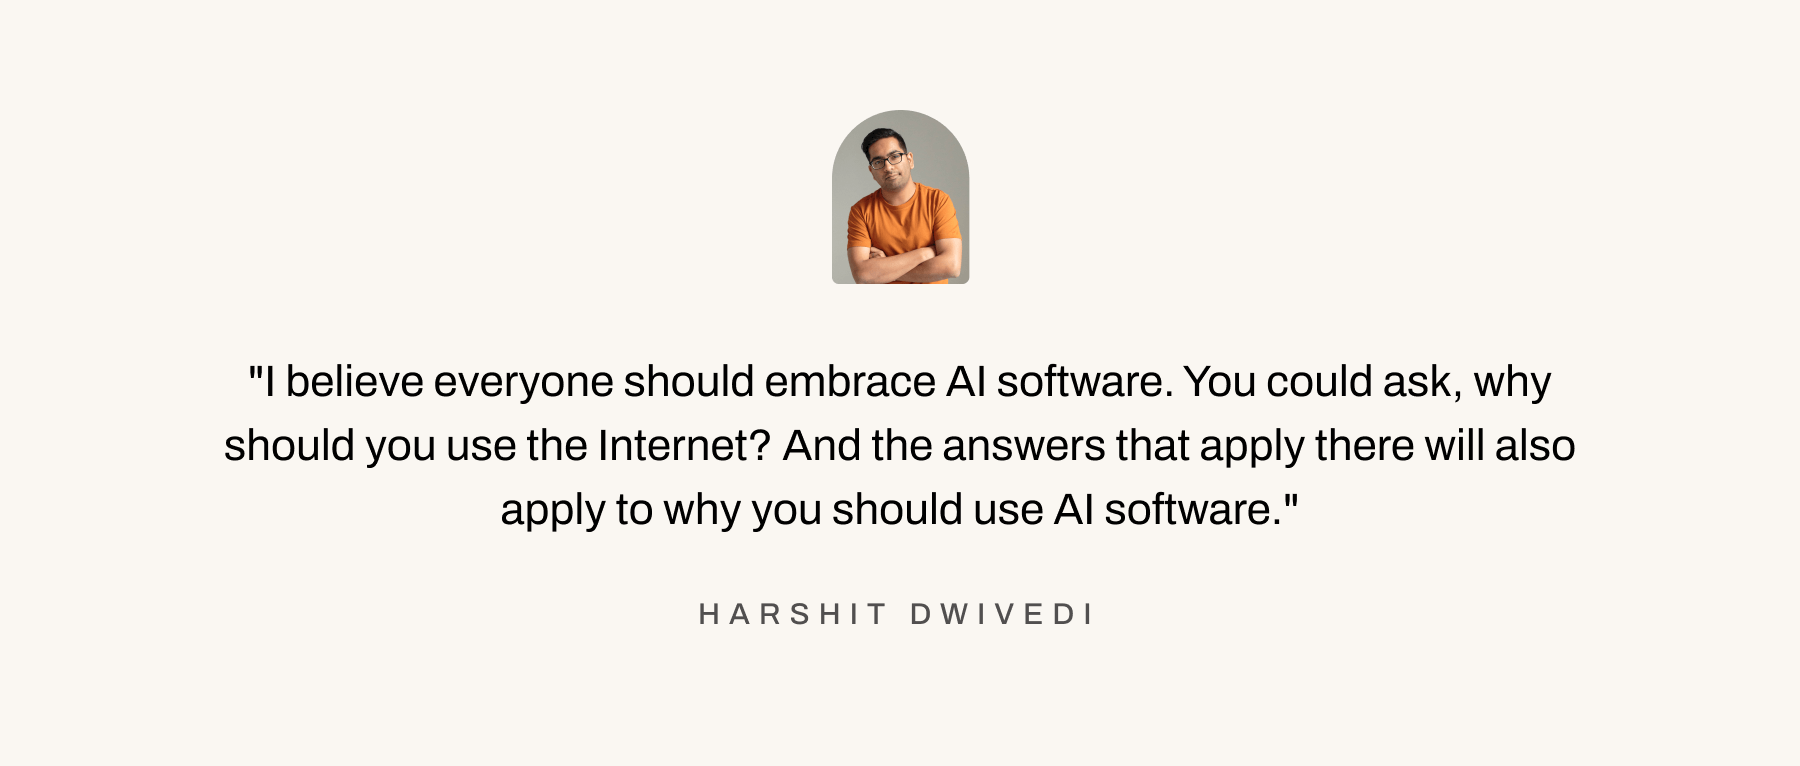 A quote by Aftershoot founder, Harshit, about how AI transforms your life when you embrace it fully